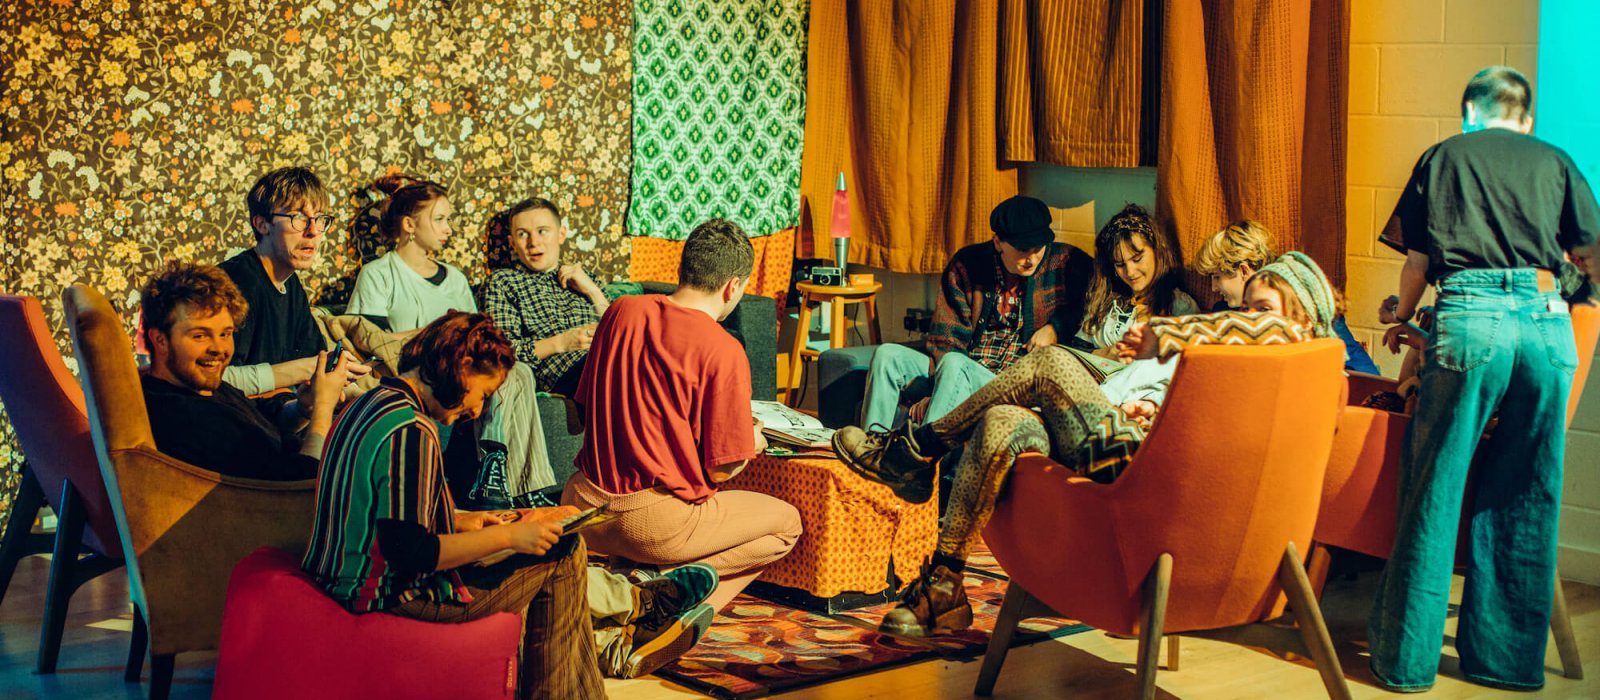 Group of Falmouth students sitting in seventies inspired space with orange curtains